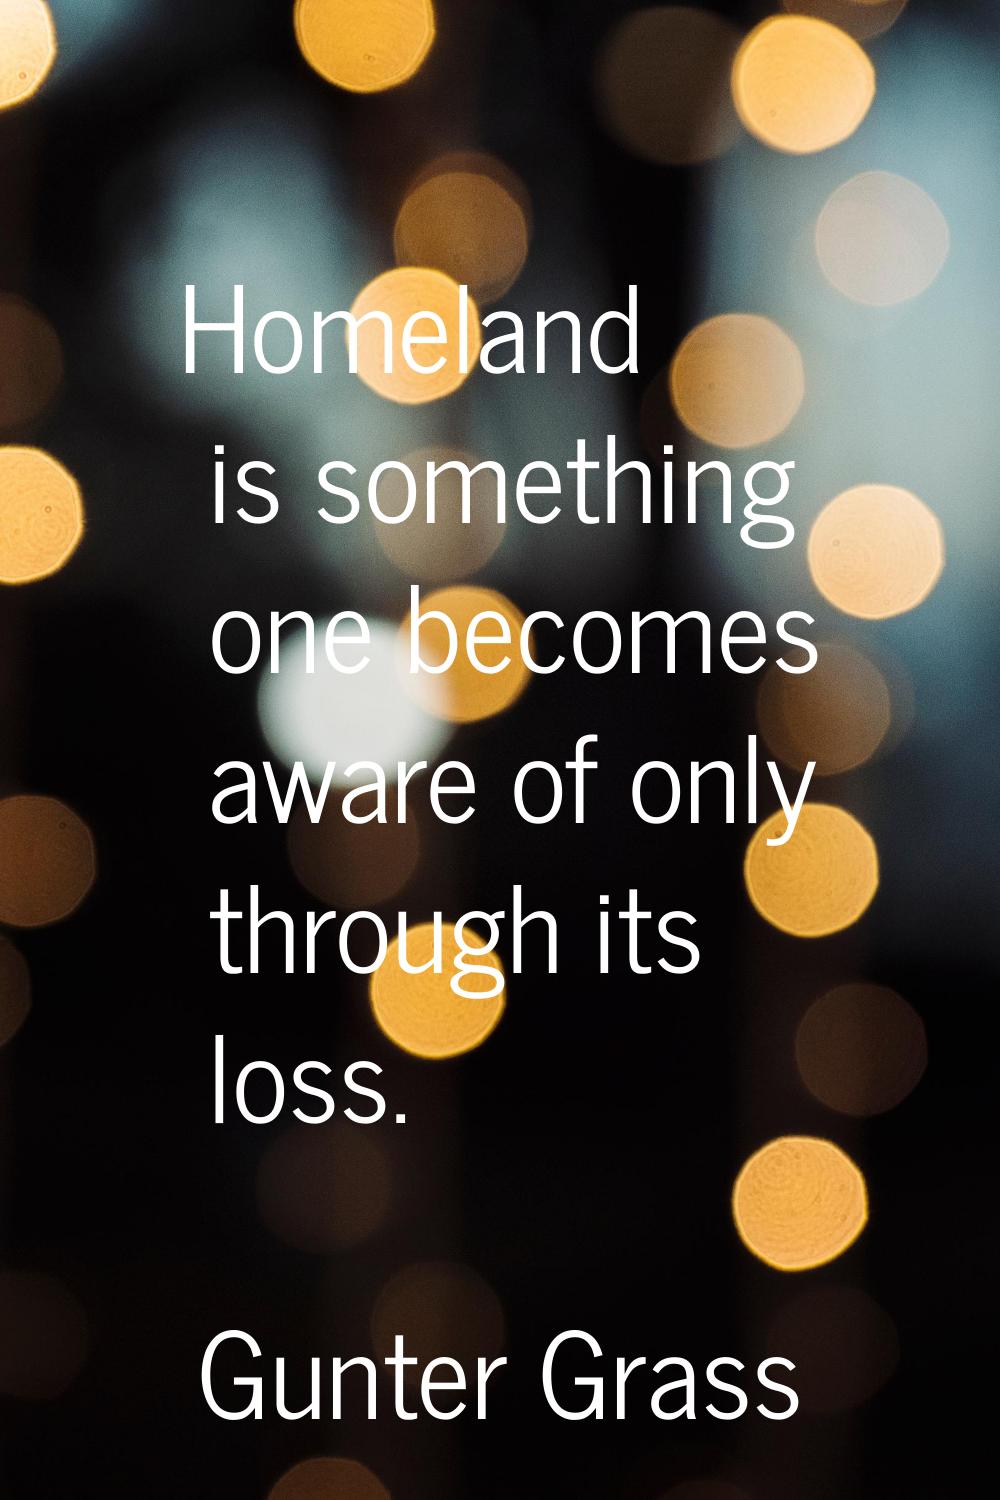 Homeland is something one becomes aware of only through its loss.